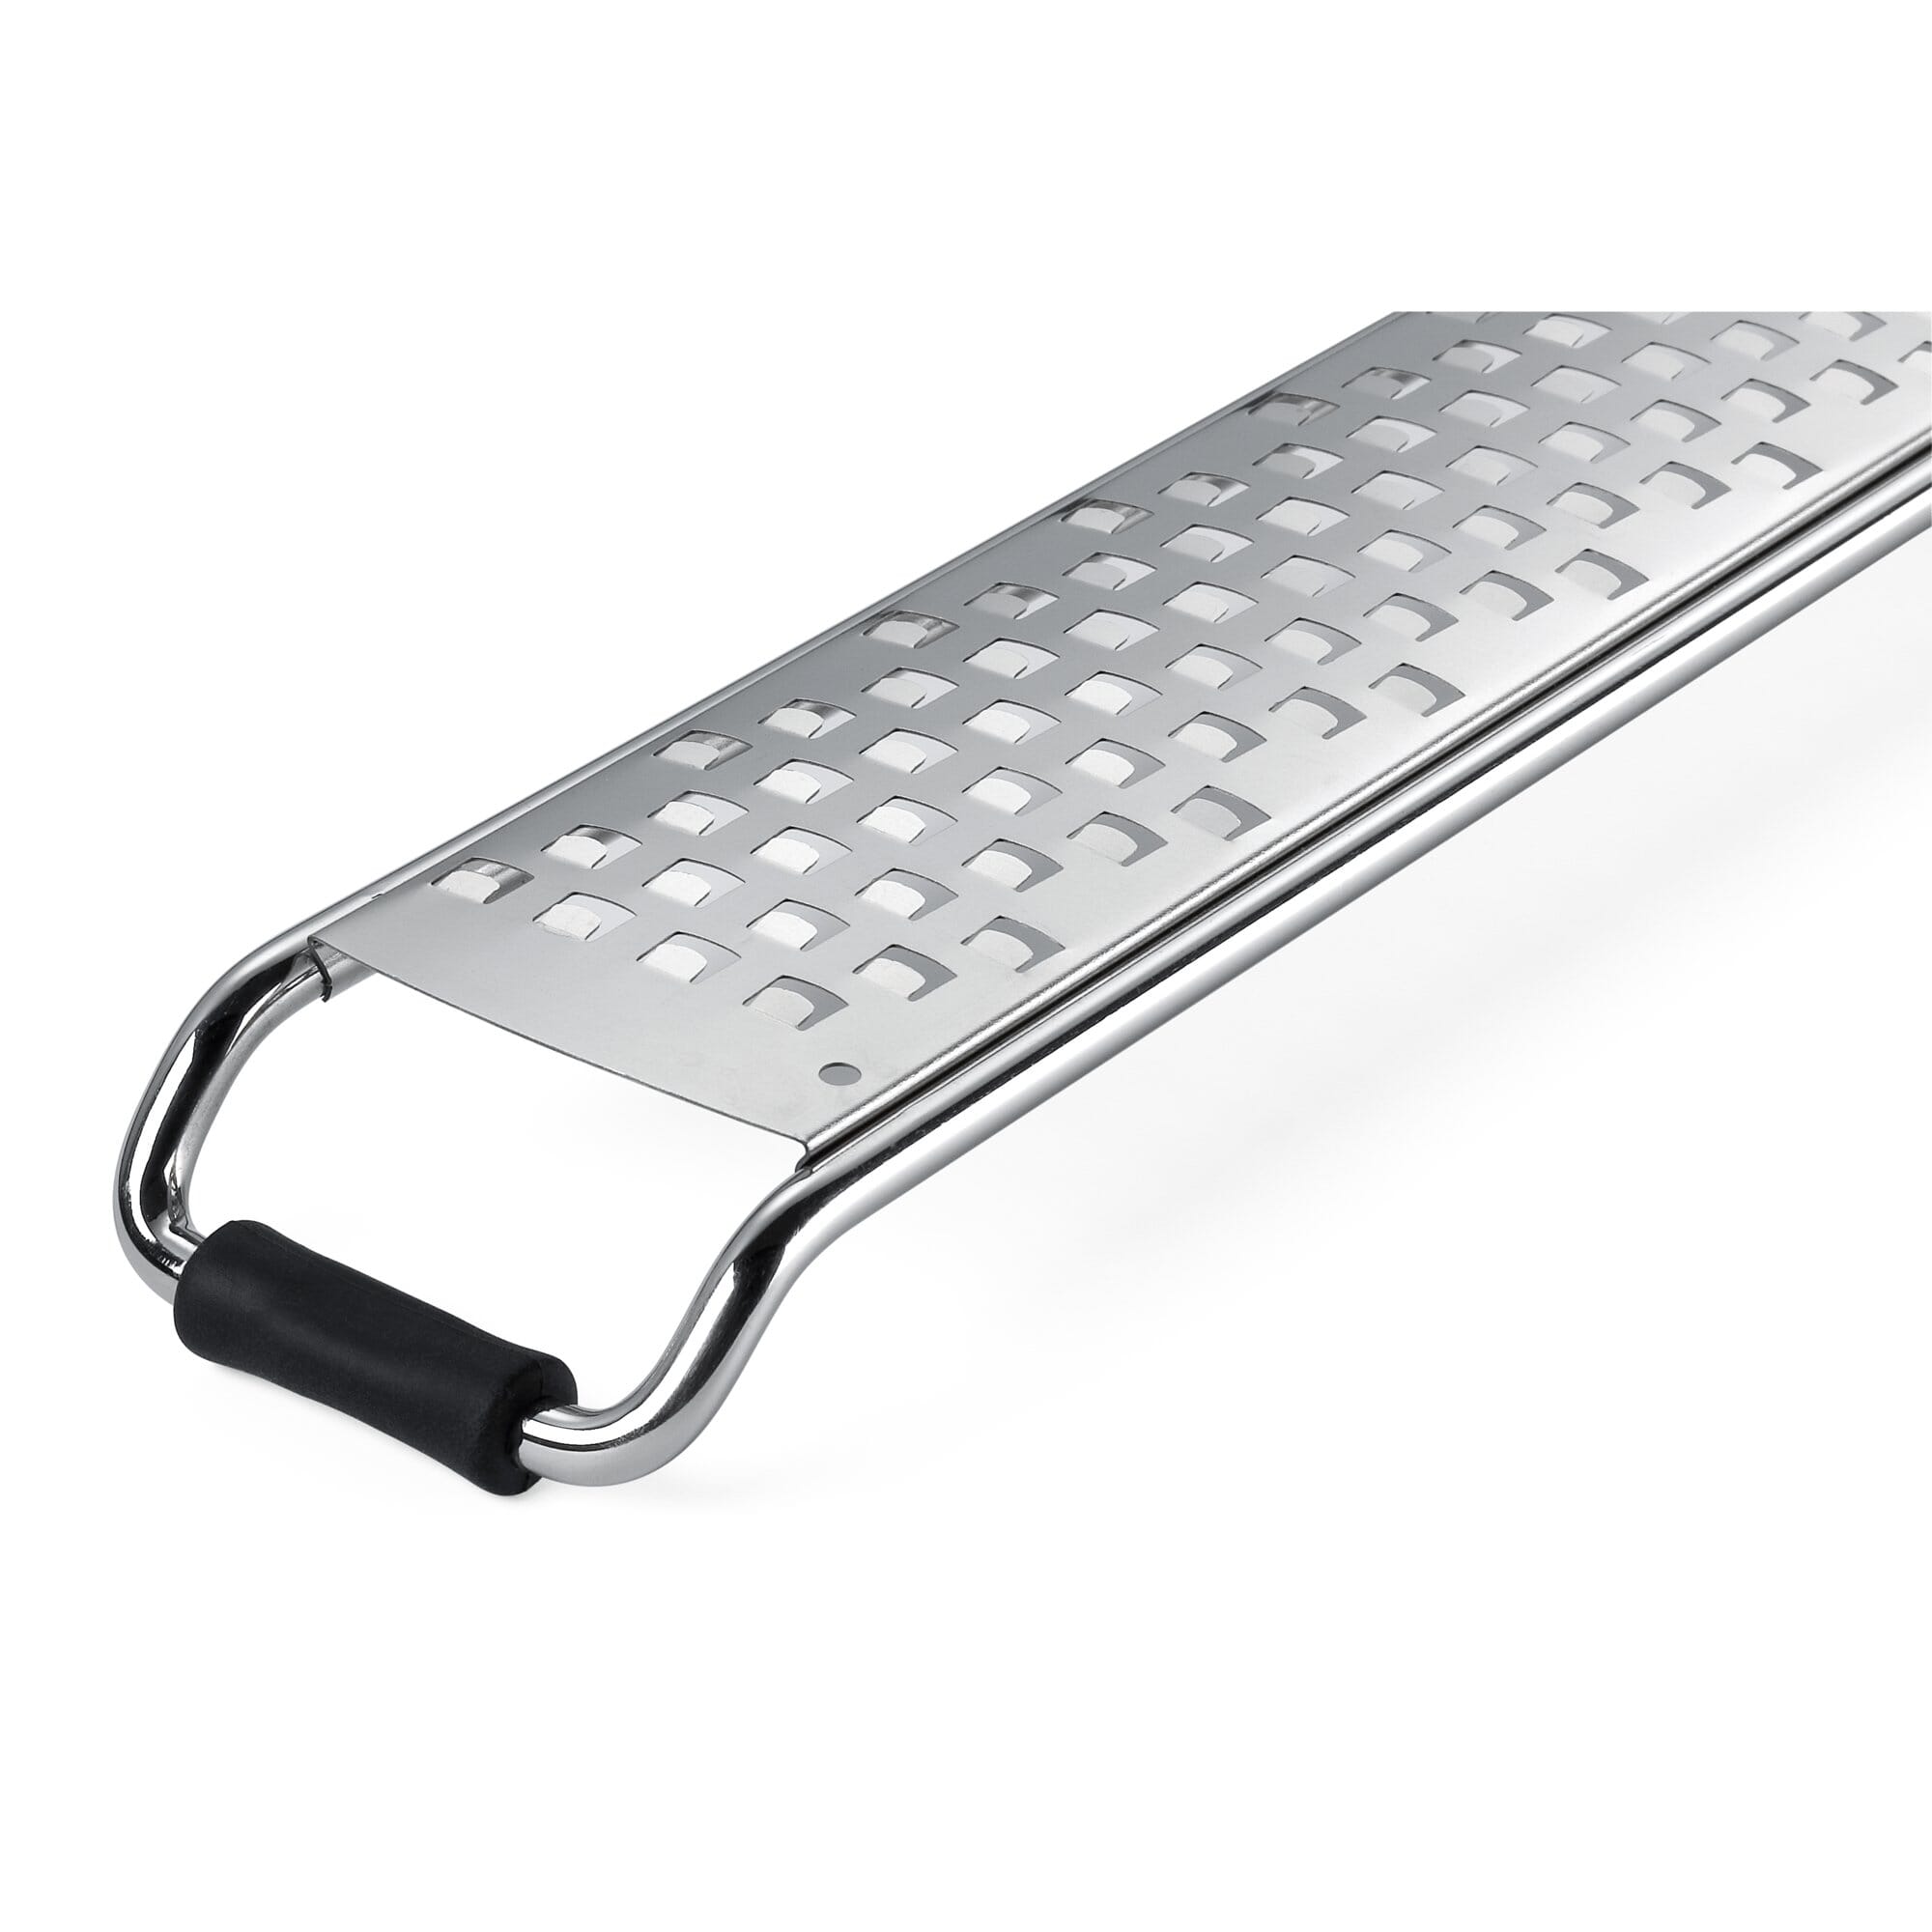 Stainless Steel Cheese Grater